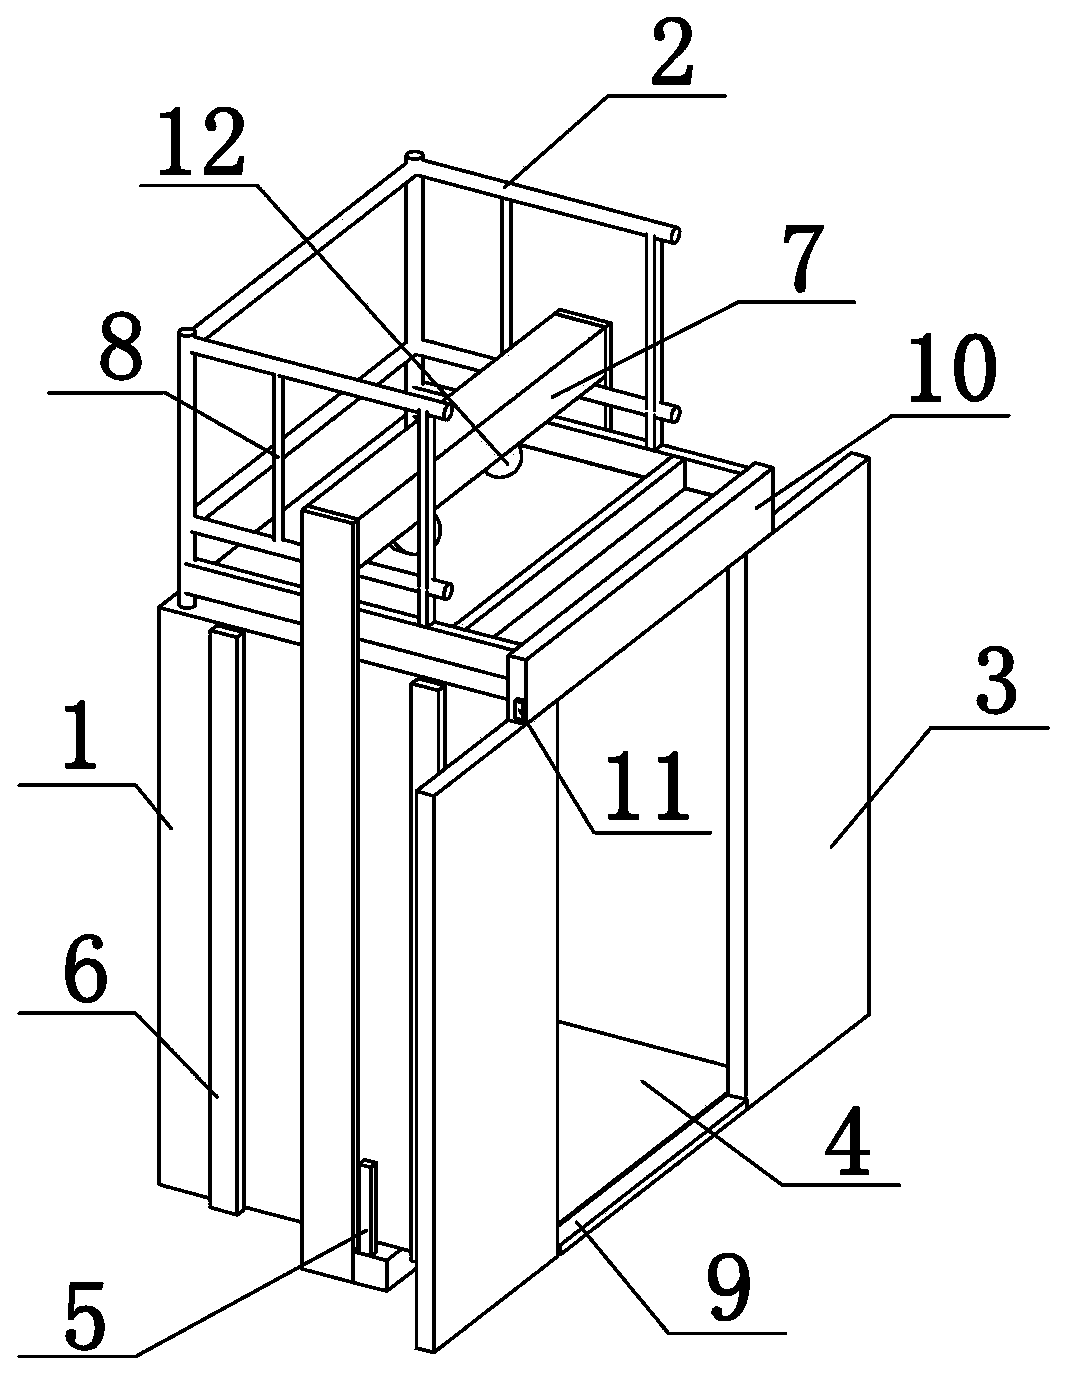 Elevator car with telescopic pedal